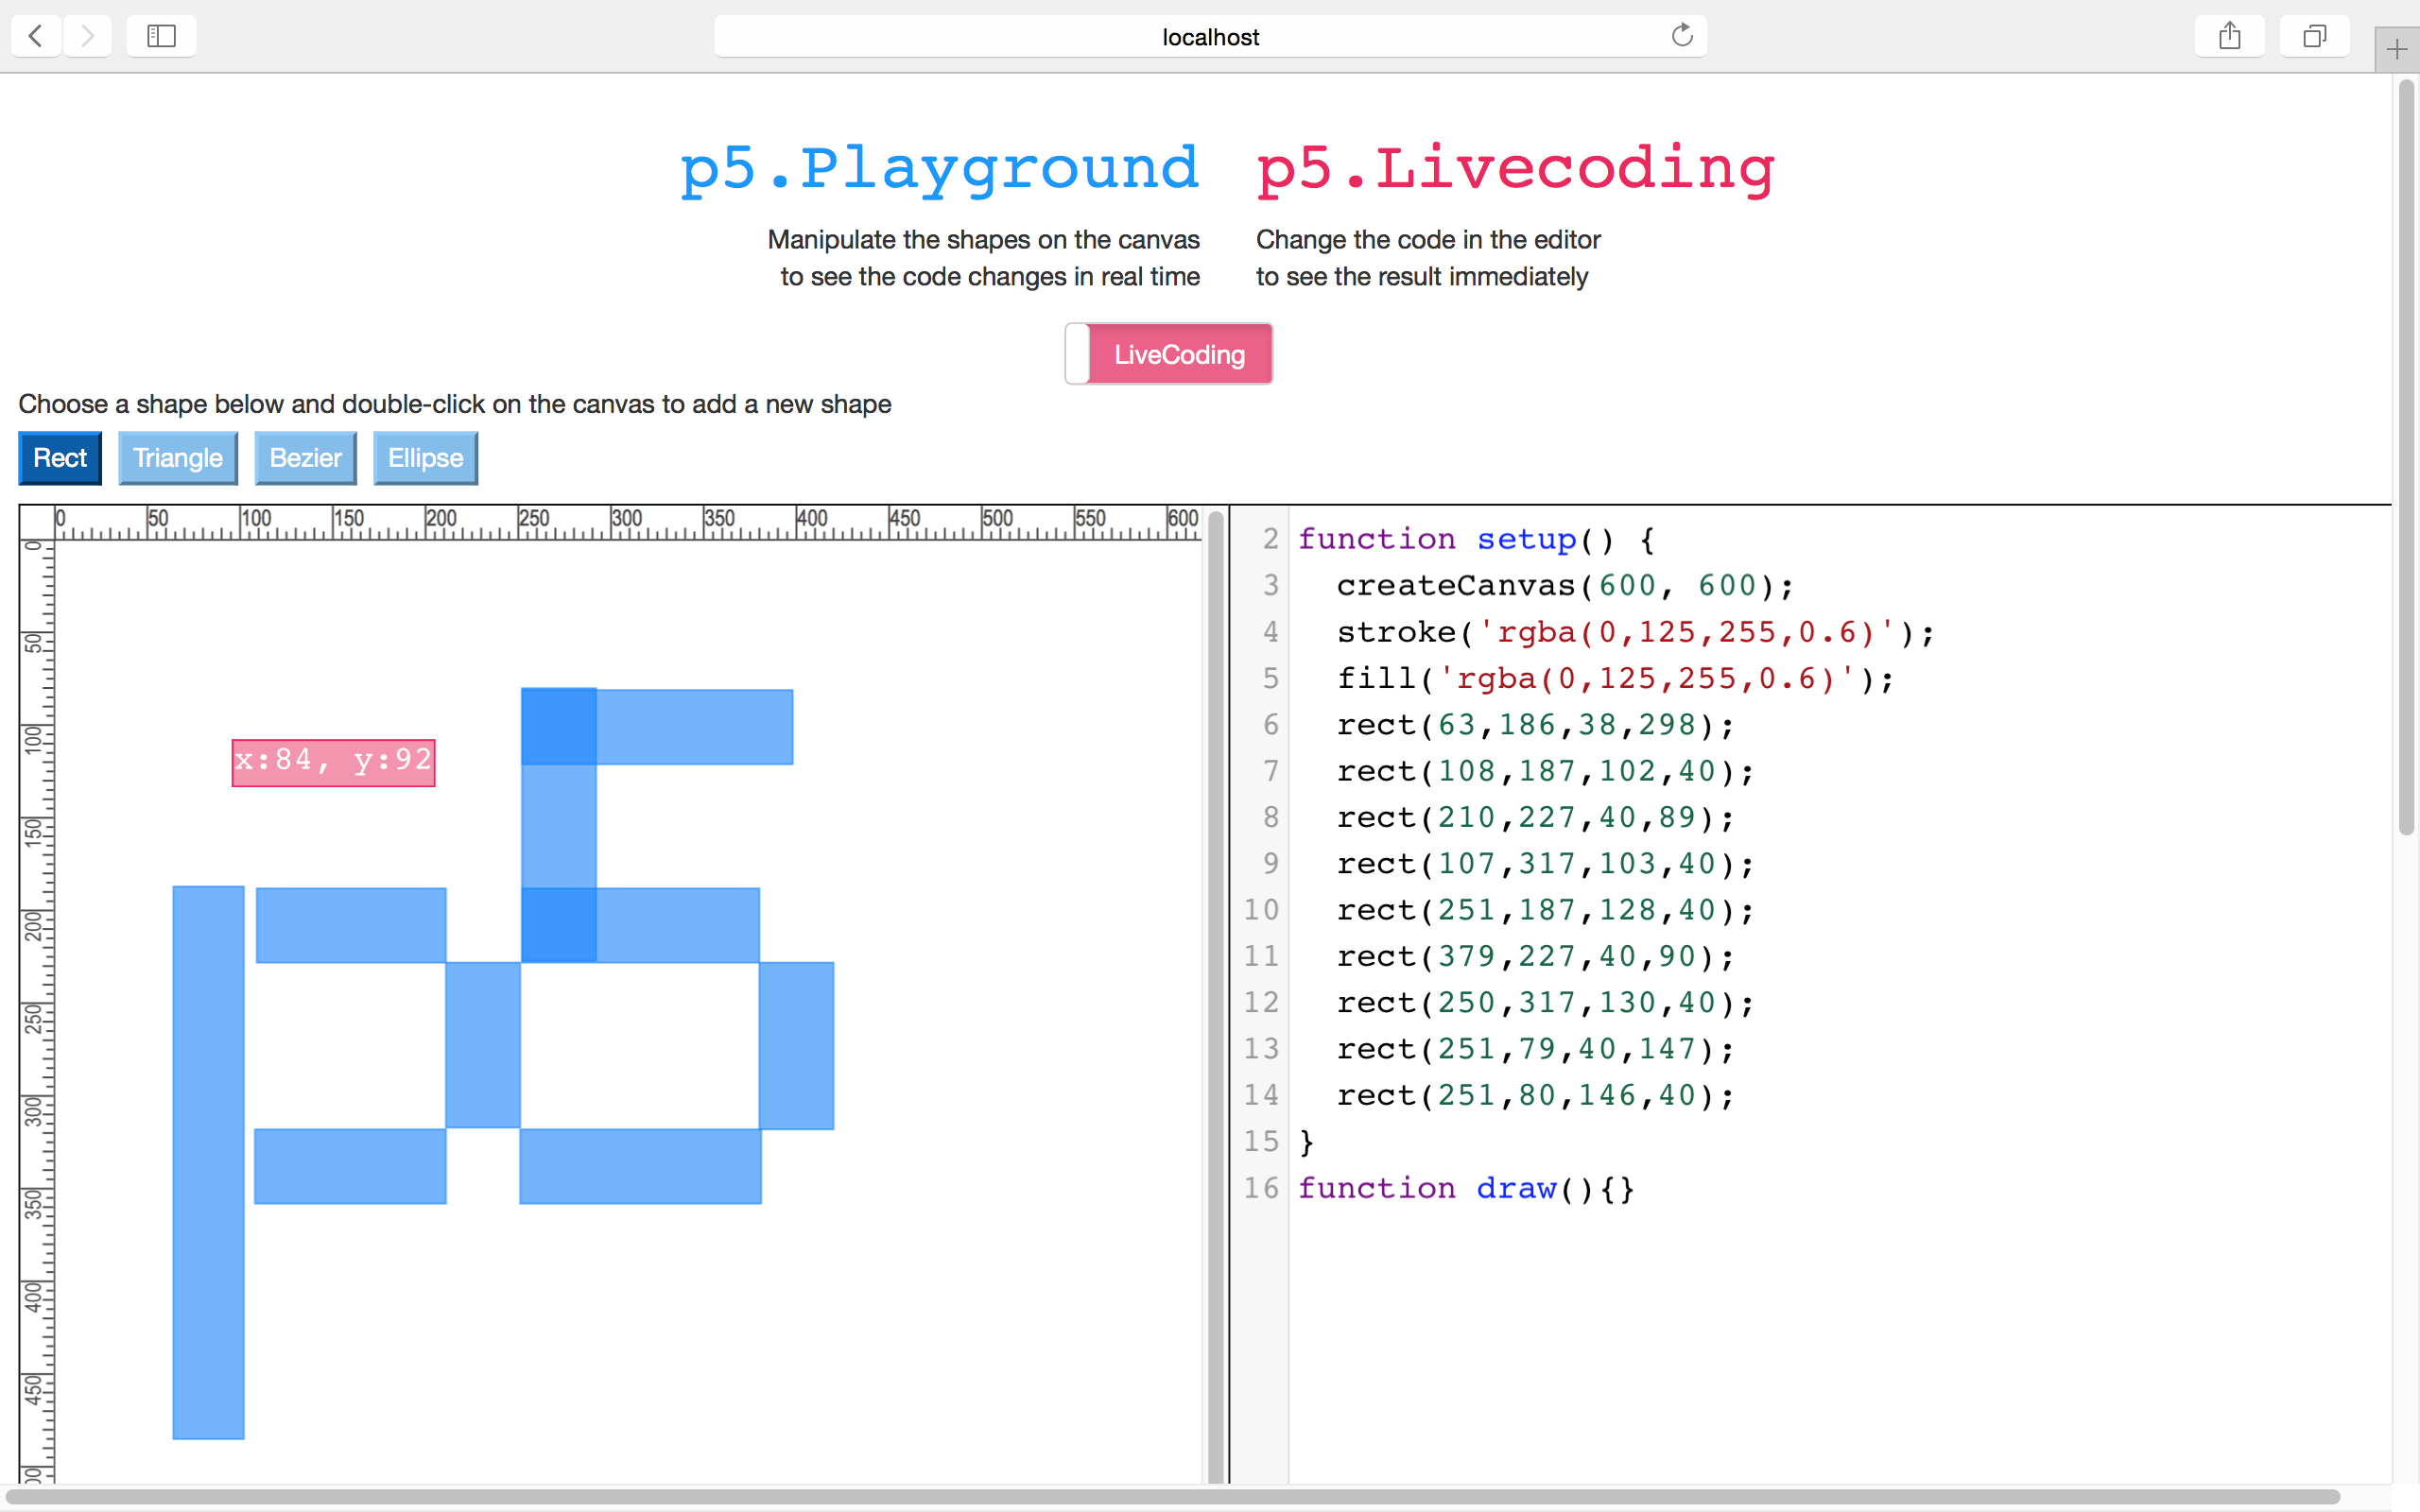 p5.playground is an interactive debug tool for p5js which allows people to manipulate shapes on canvas in real time and visually understand a lot of the math that goes behind drawing stuff on canvas. This tool exists as a live coding p5 editor.